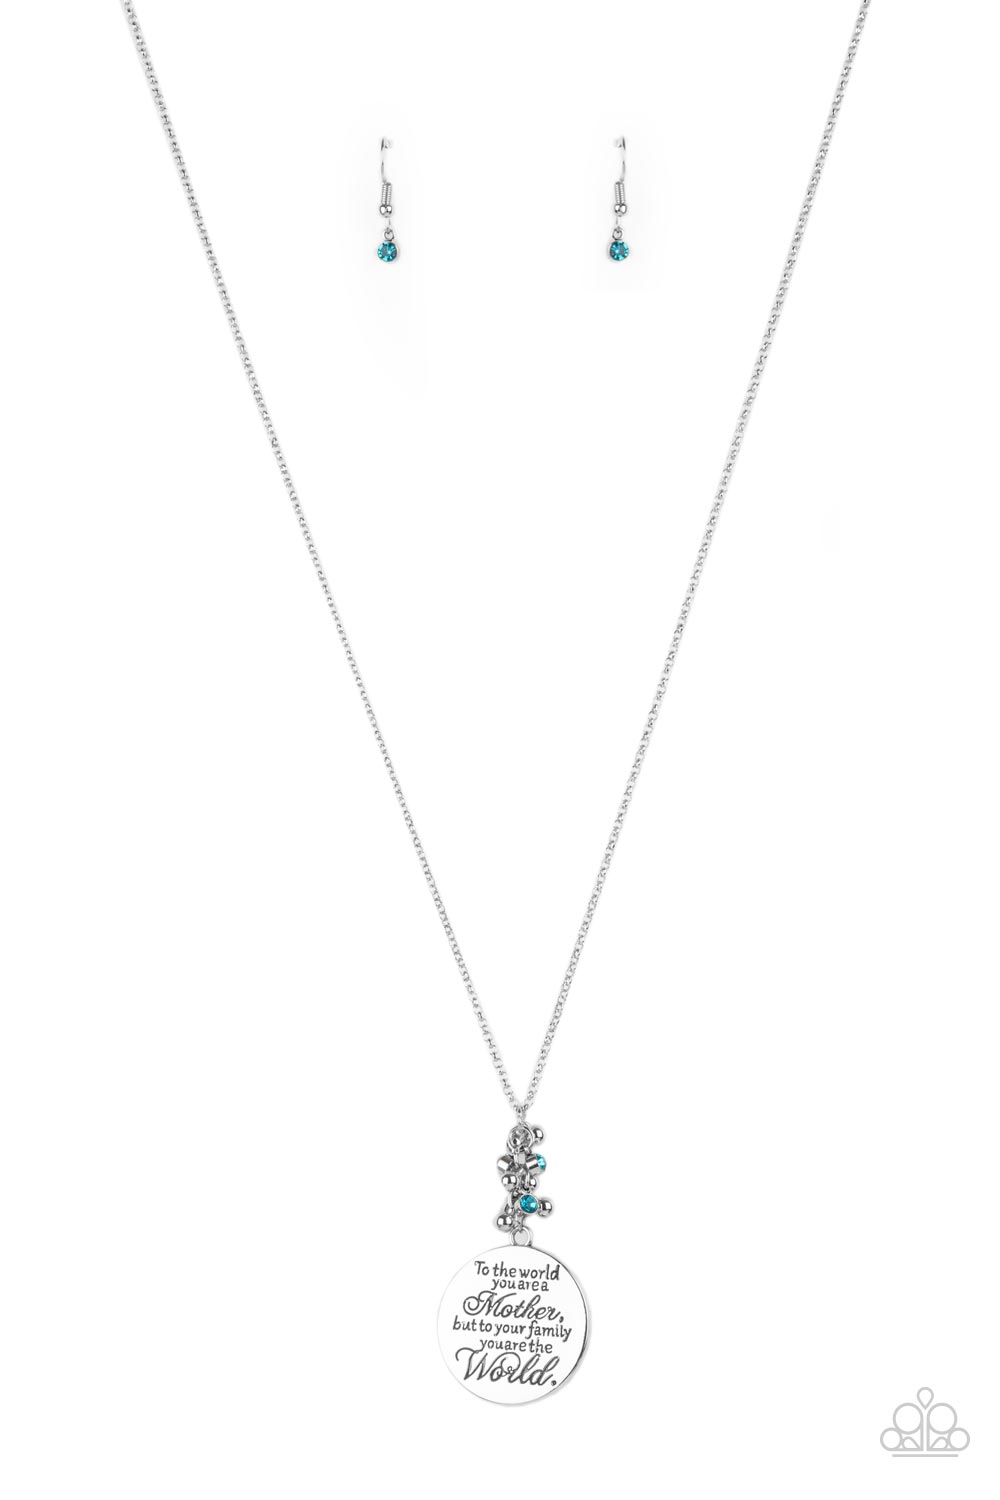 Necklace - Maternal Blessings - Blue